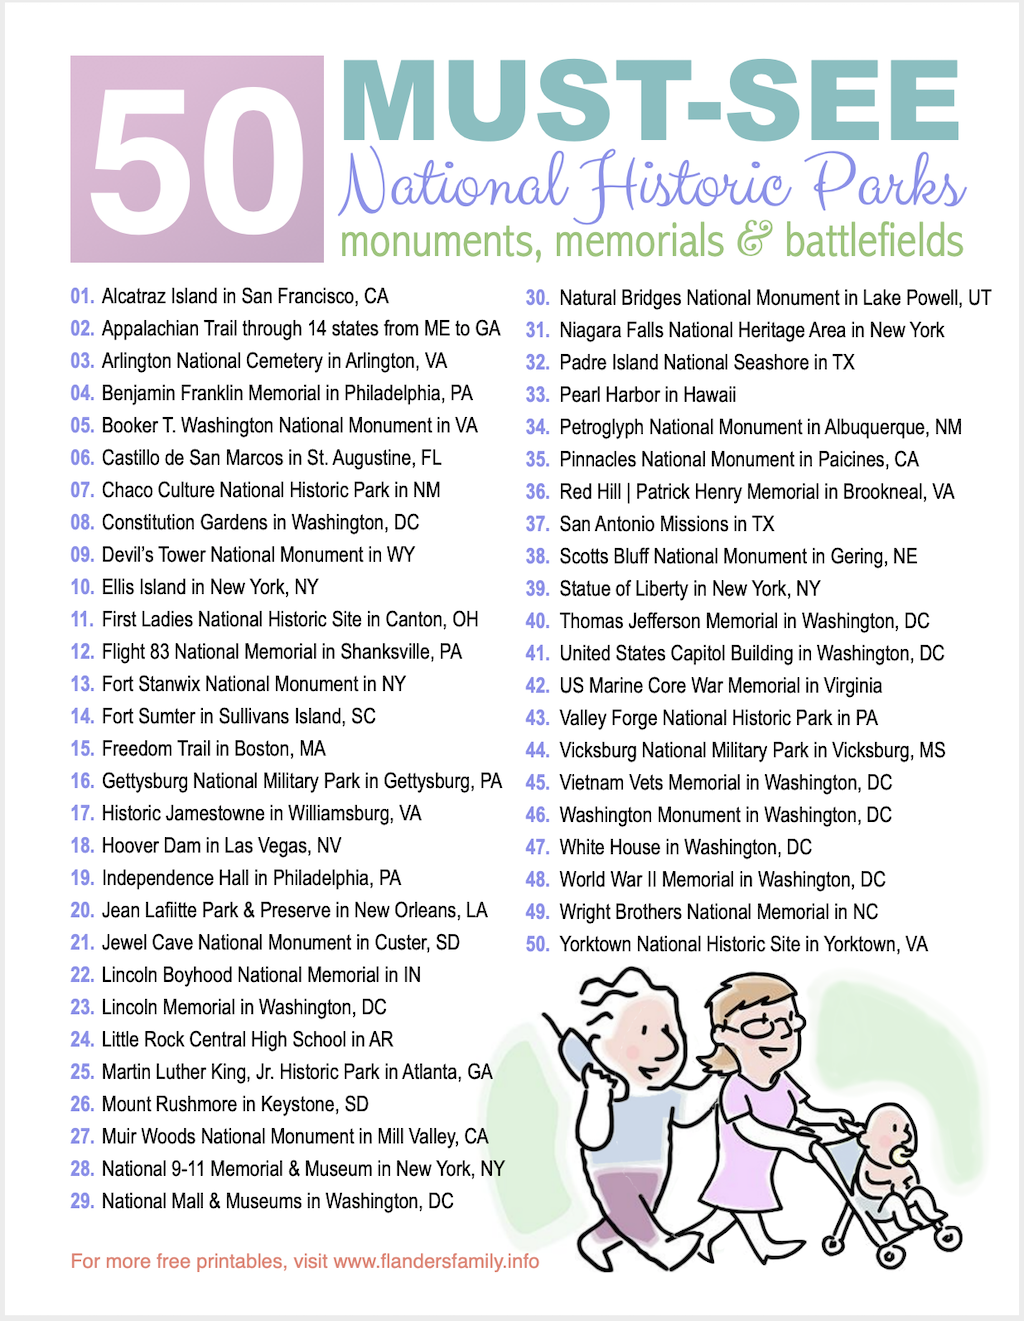 50 National Monuments and Memorials